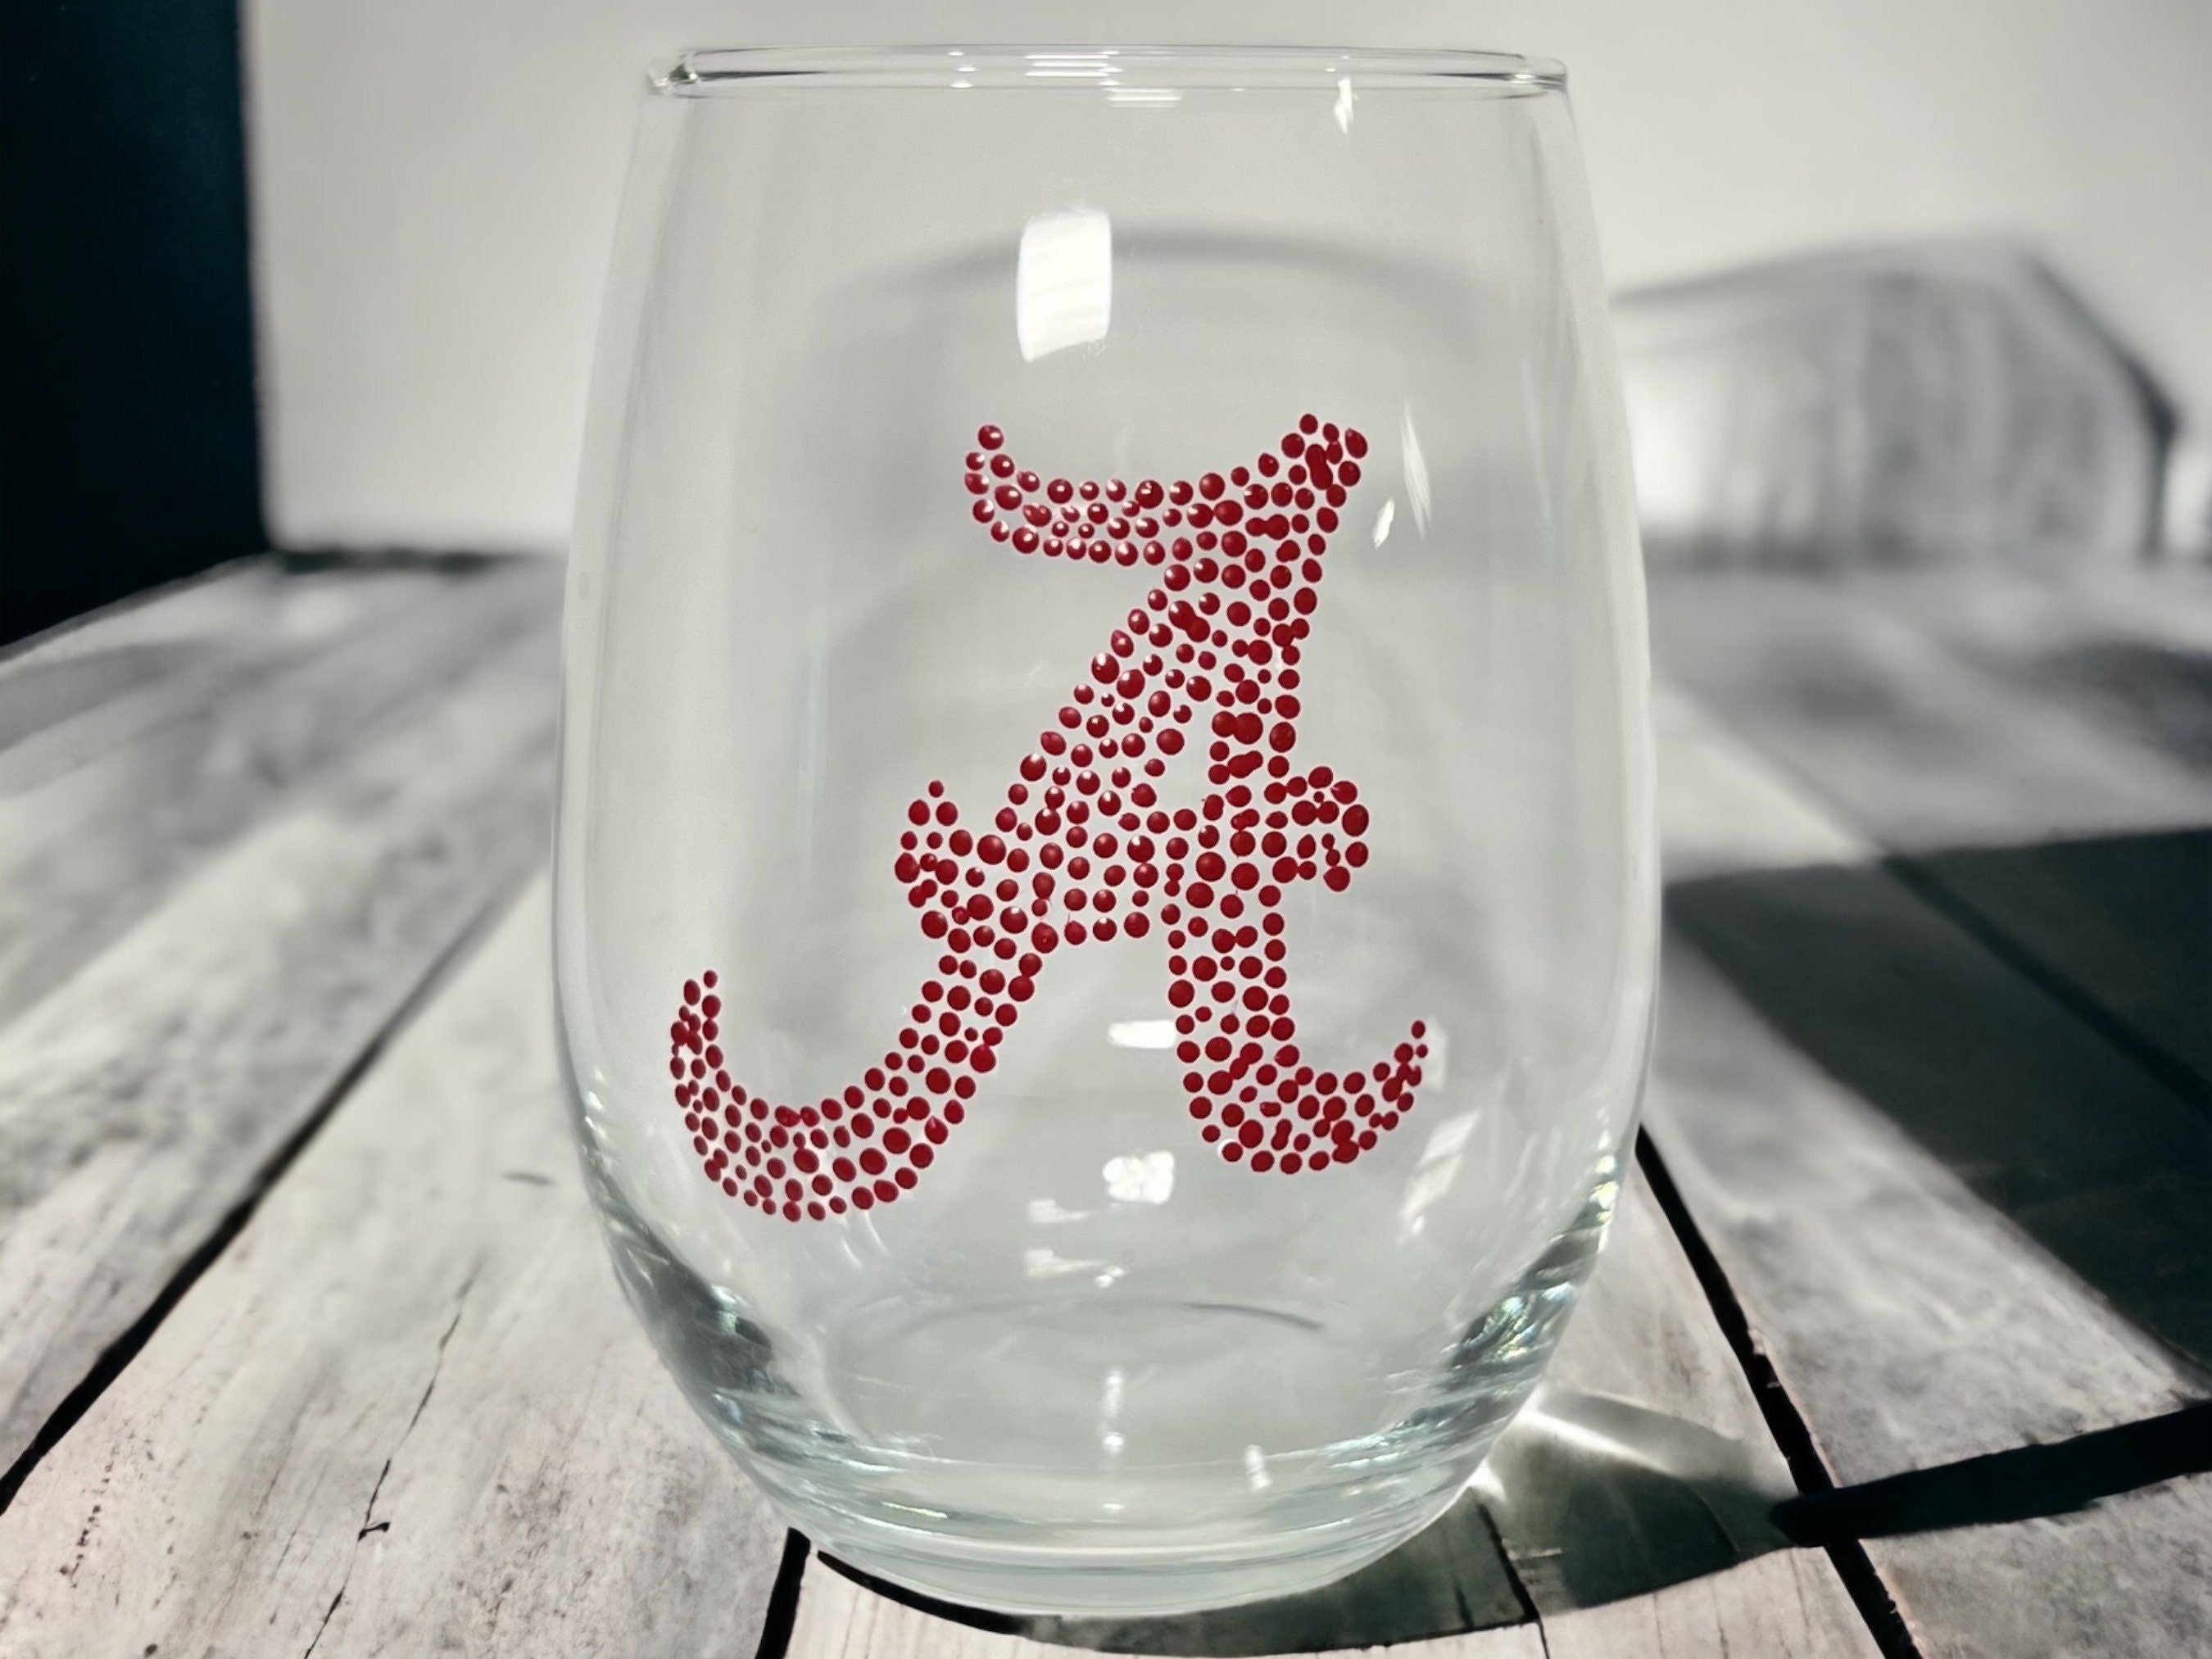 Alabama Tumbler, Made With Mica Powders, Vinyl and Waterslides